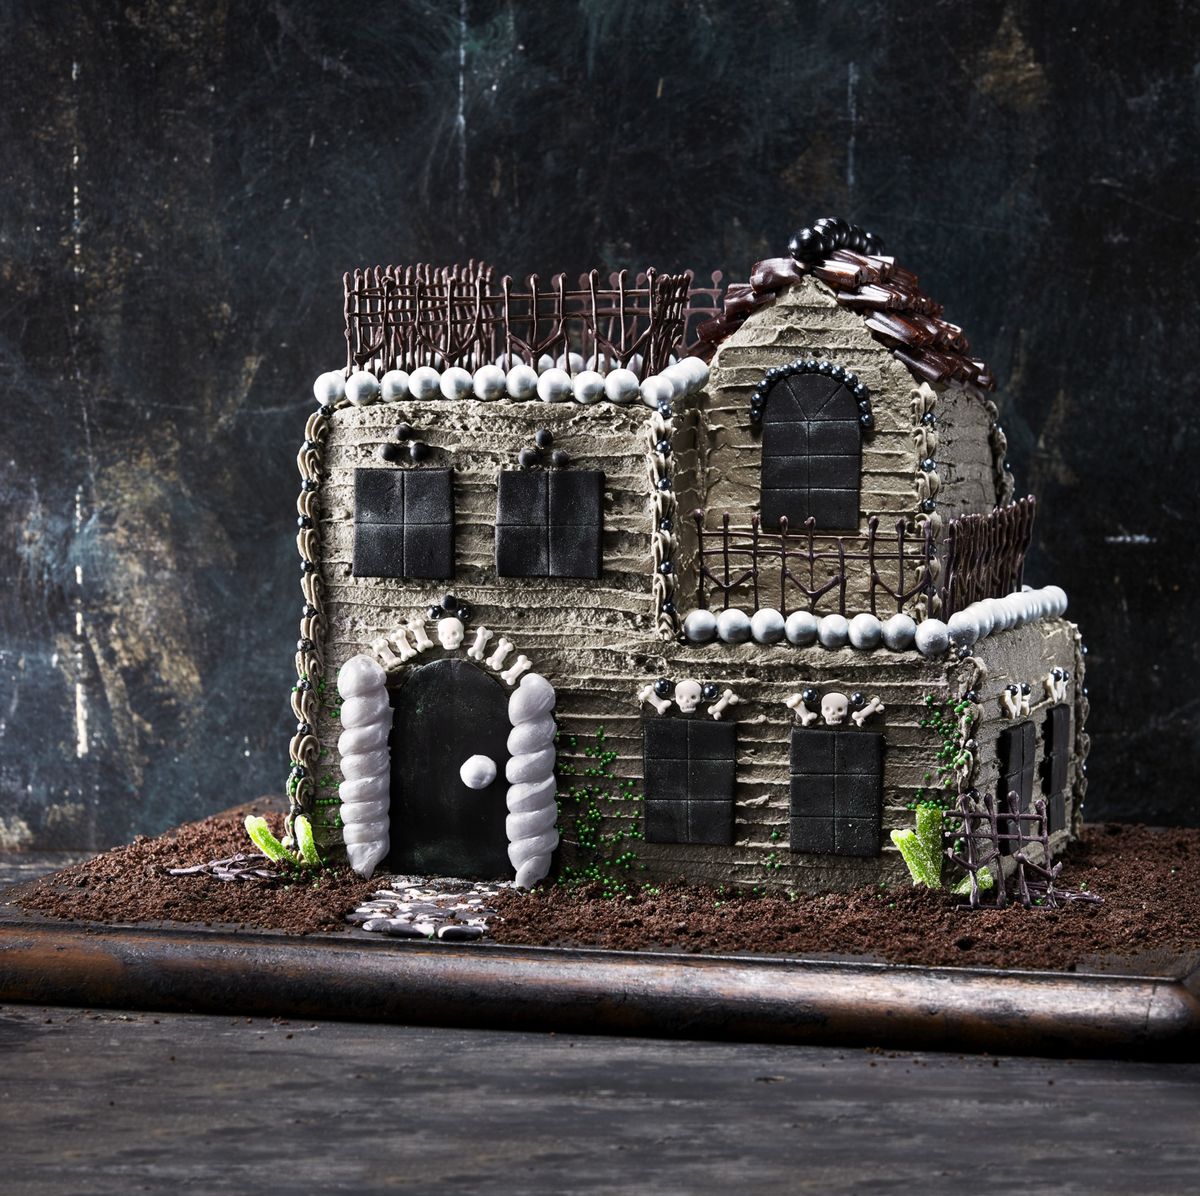 Best Towering Haunted House Cake - How To Make Towering Haunted House Cake